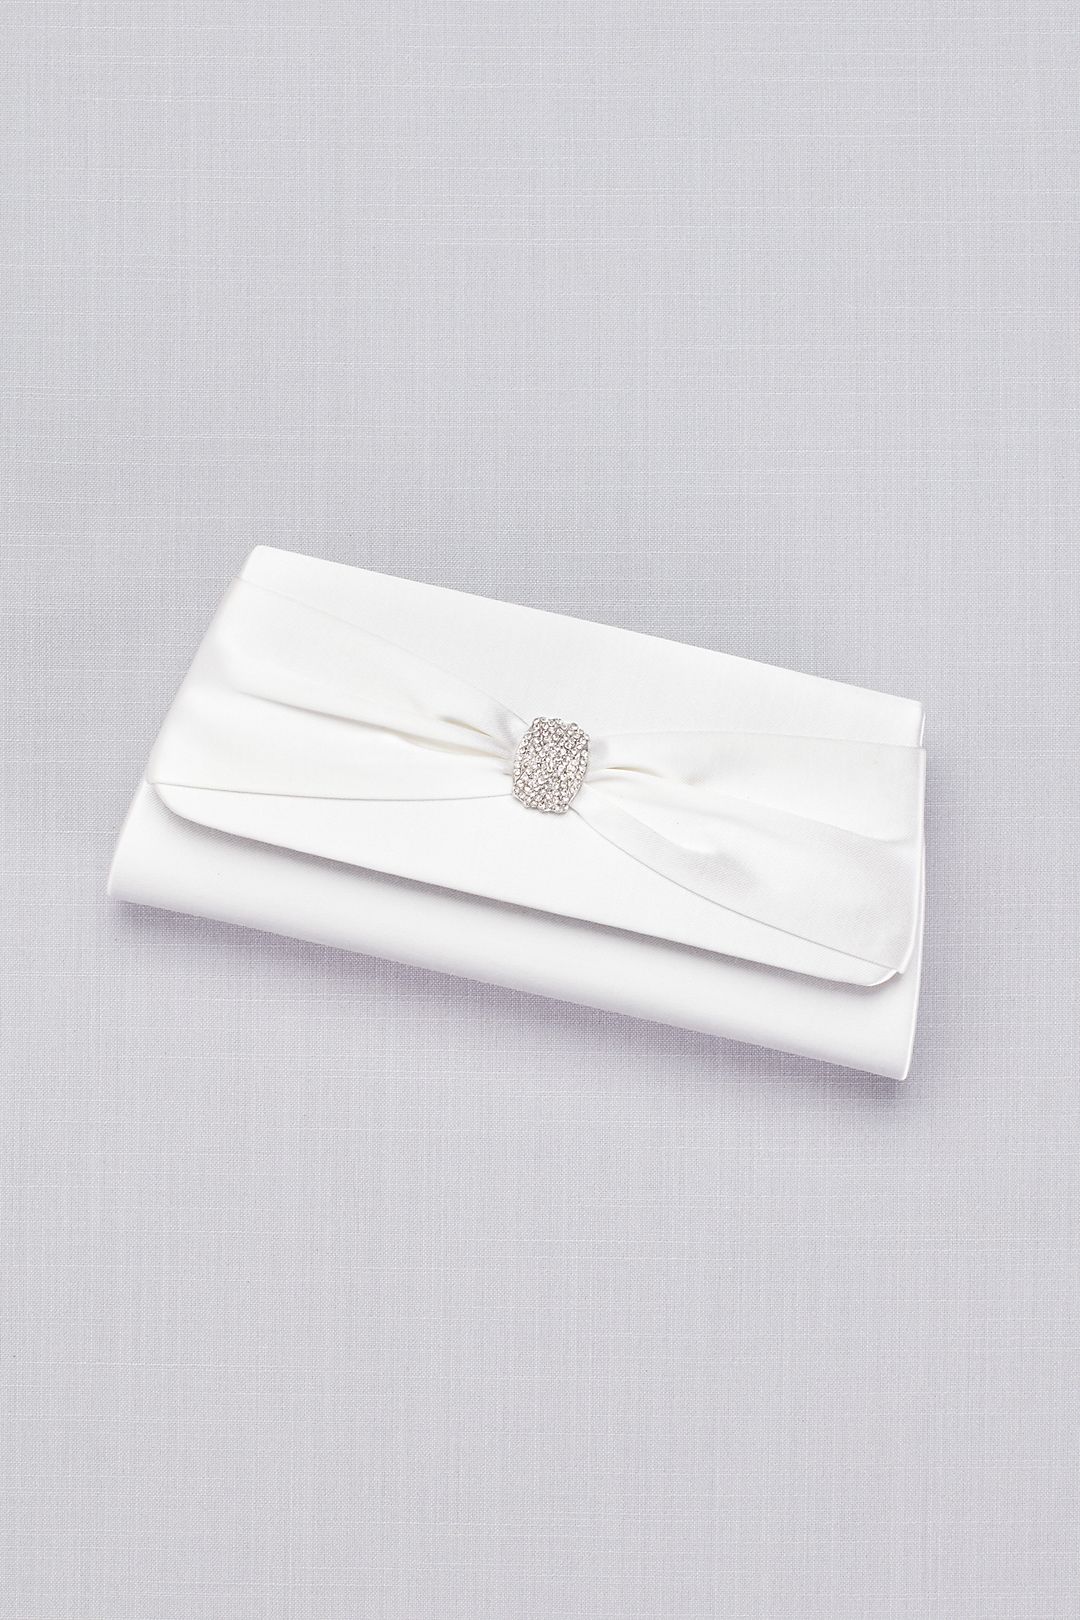 Dyeable Satin Clutch with Rhinestone Bow Image 4